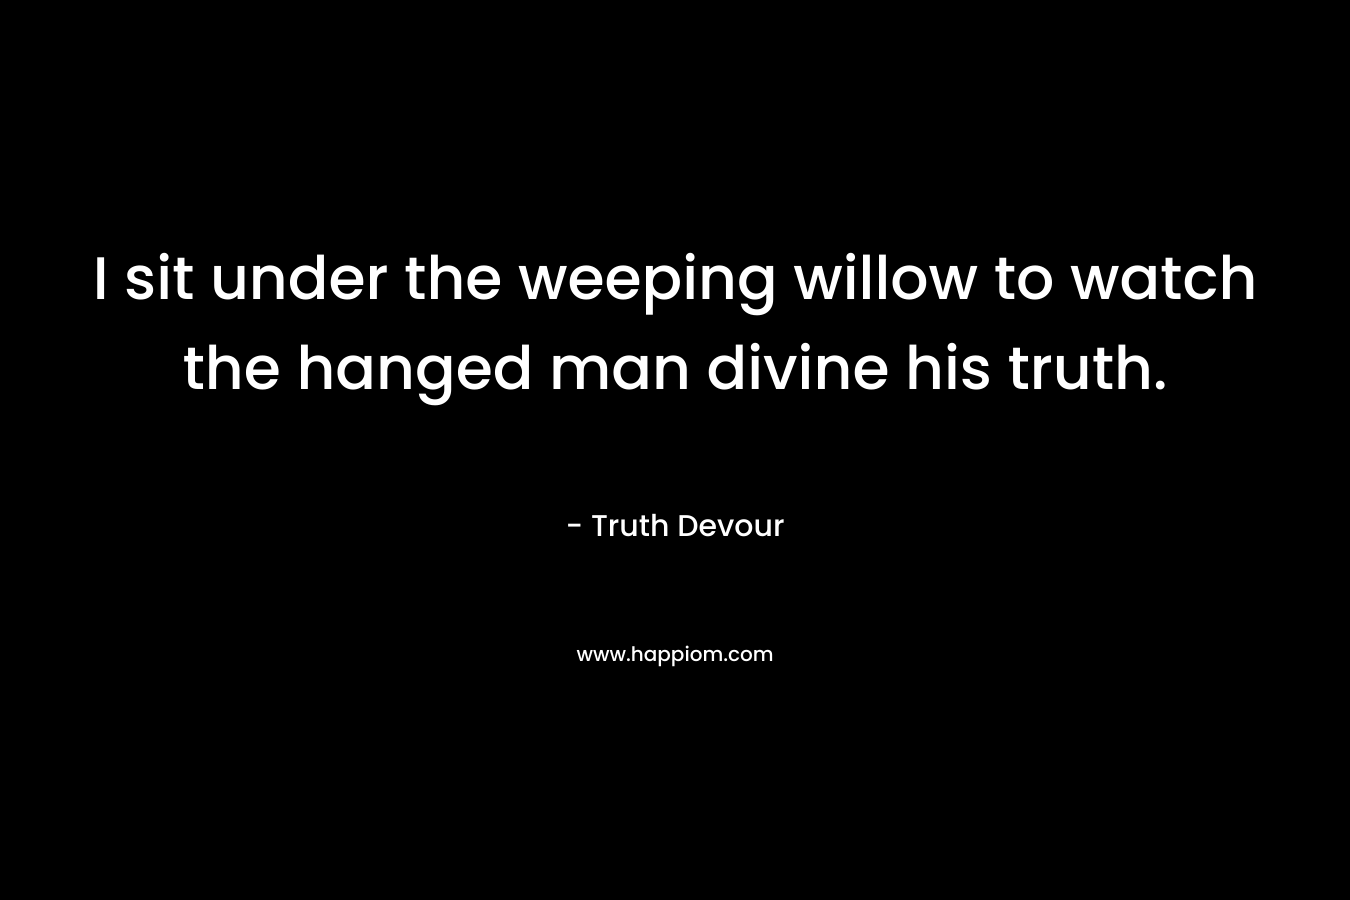 I sit under the weeping willow to watch the hanged man divine his truth. – Truth Devour